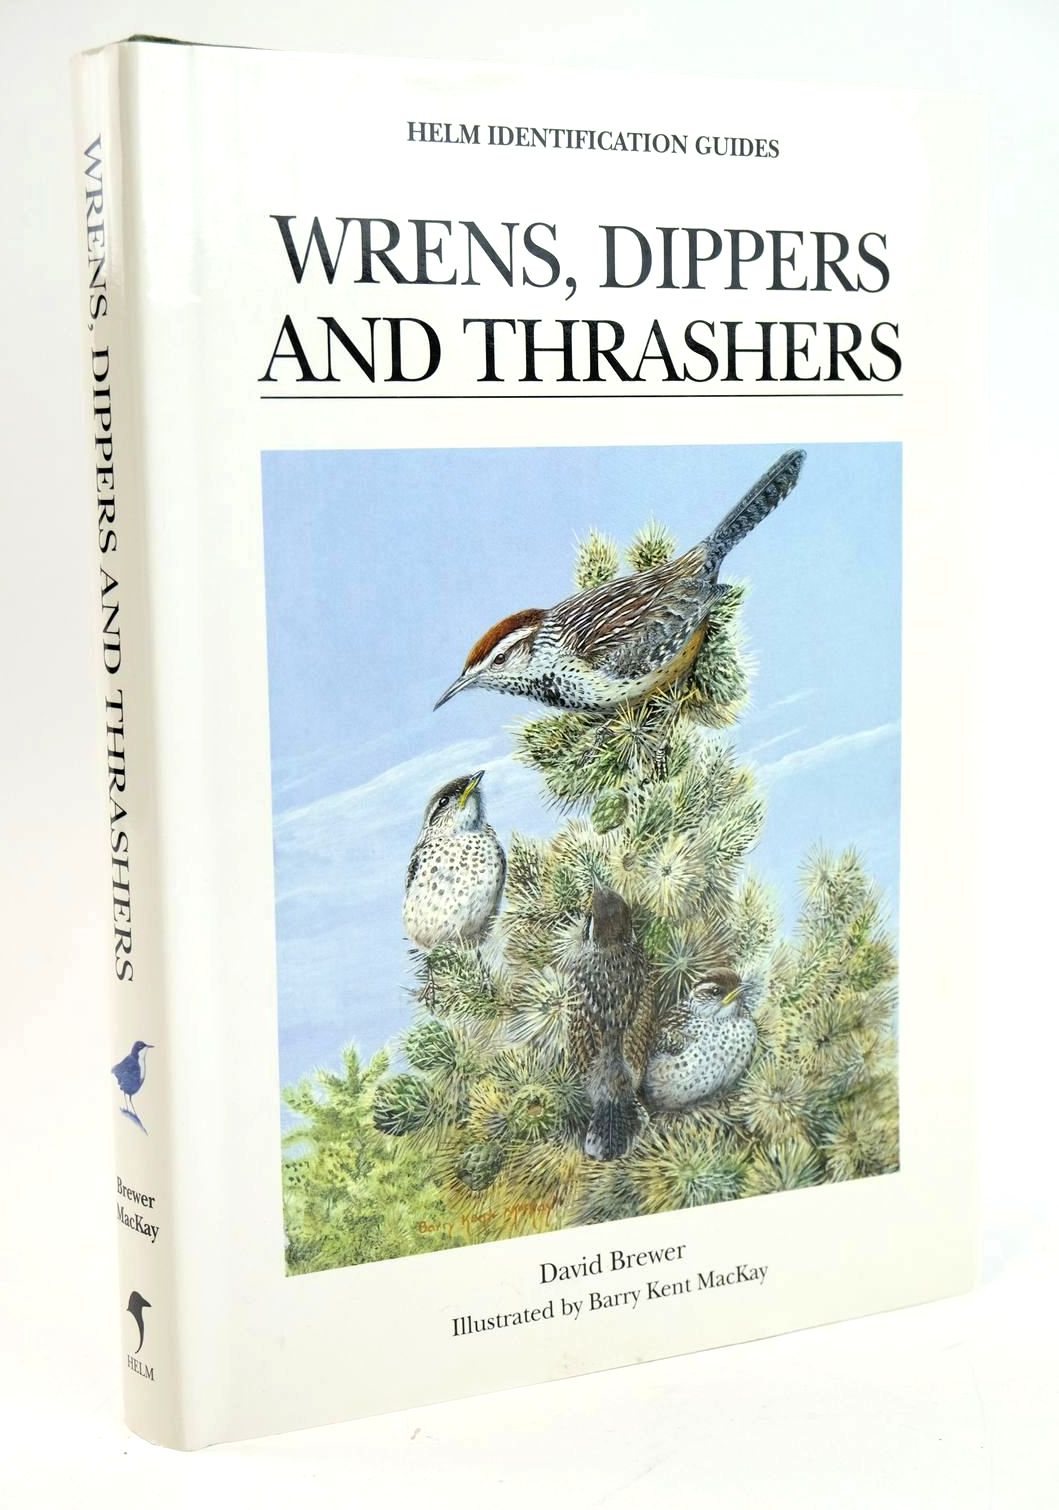 Photo of WRENS, DIPPERS AND THRASHERS (HELM IDENTIFICATION GUIDES) written by Brewer, David illustrated by Mackay, Barry Kent published by Christopher Helm (STOCK CODE: 1319289)  for sale by Stella & Rose's Books